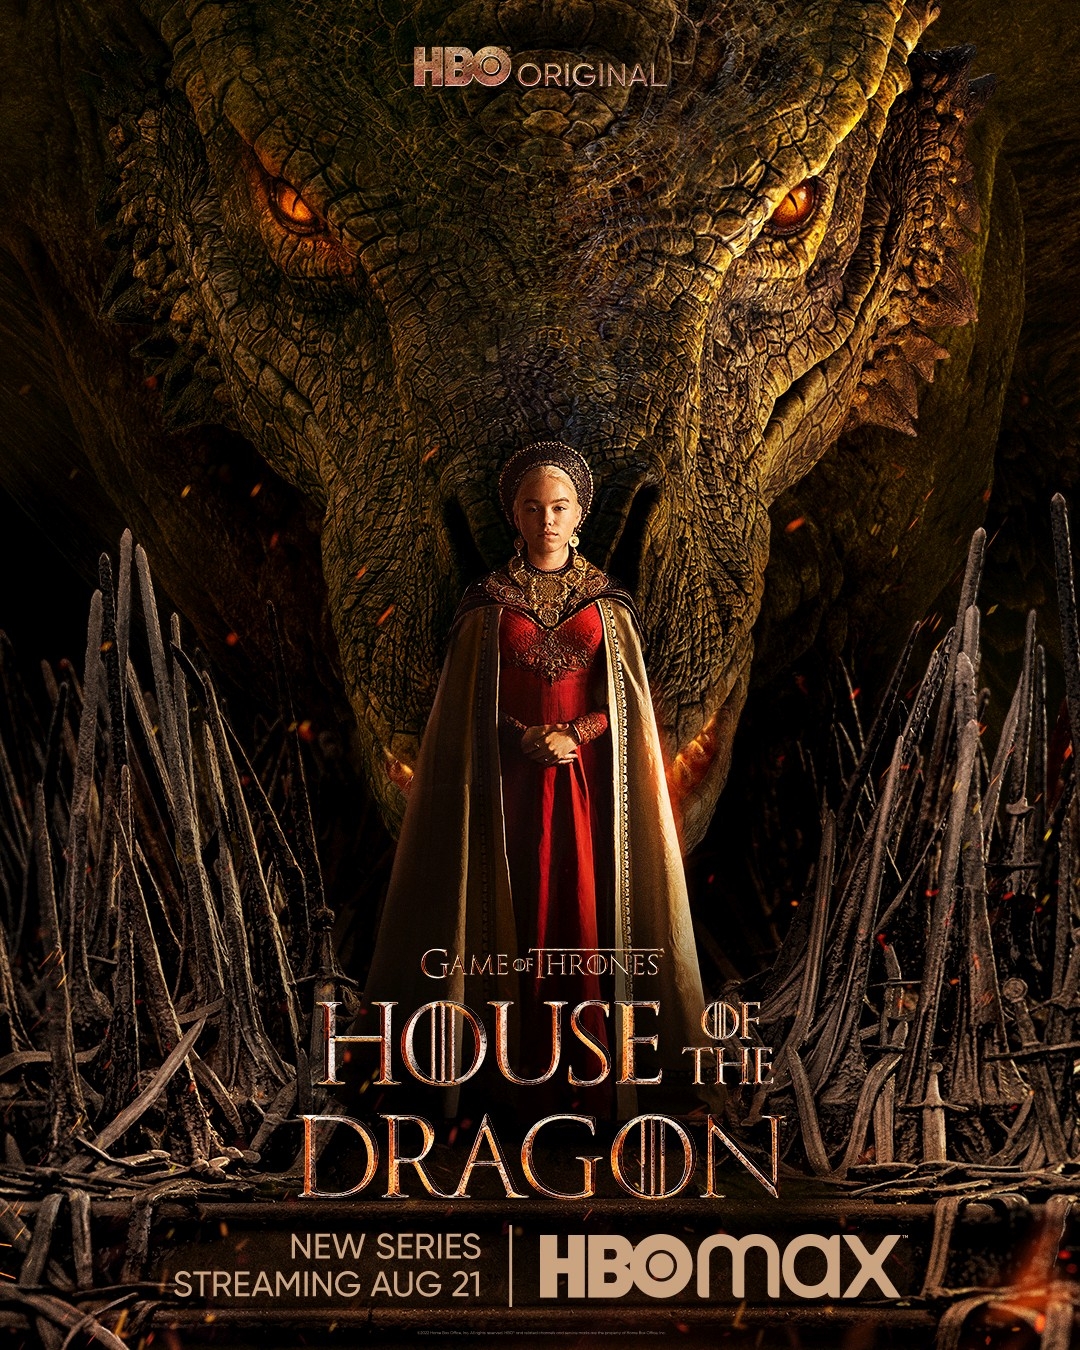 House of the Dragon - House Of The Dragon: Official Teaser